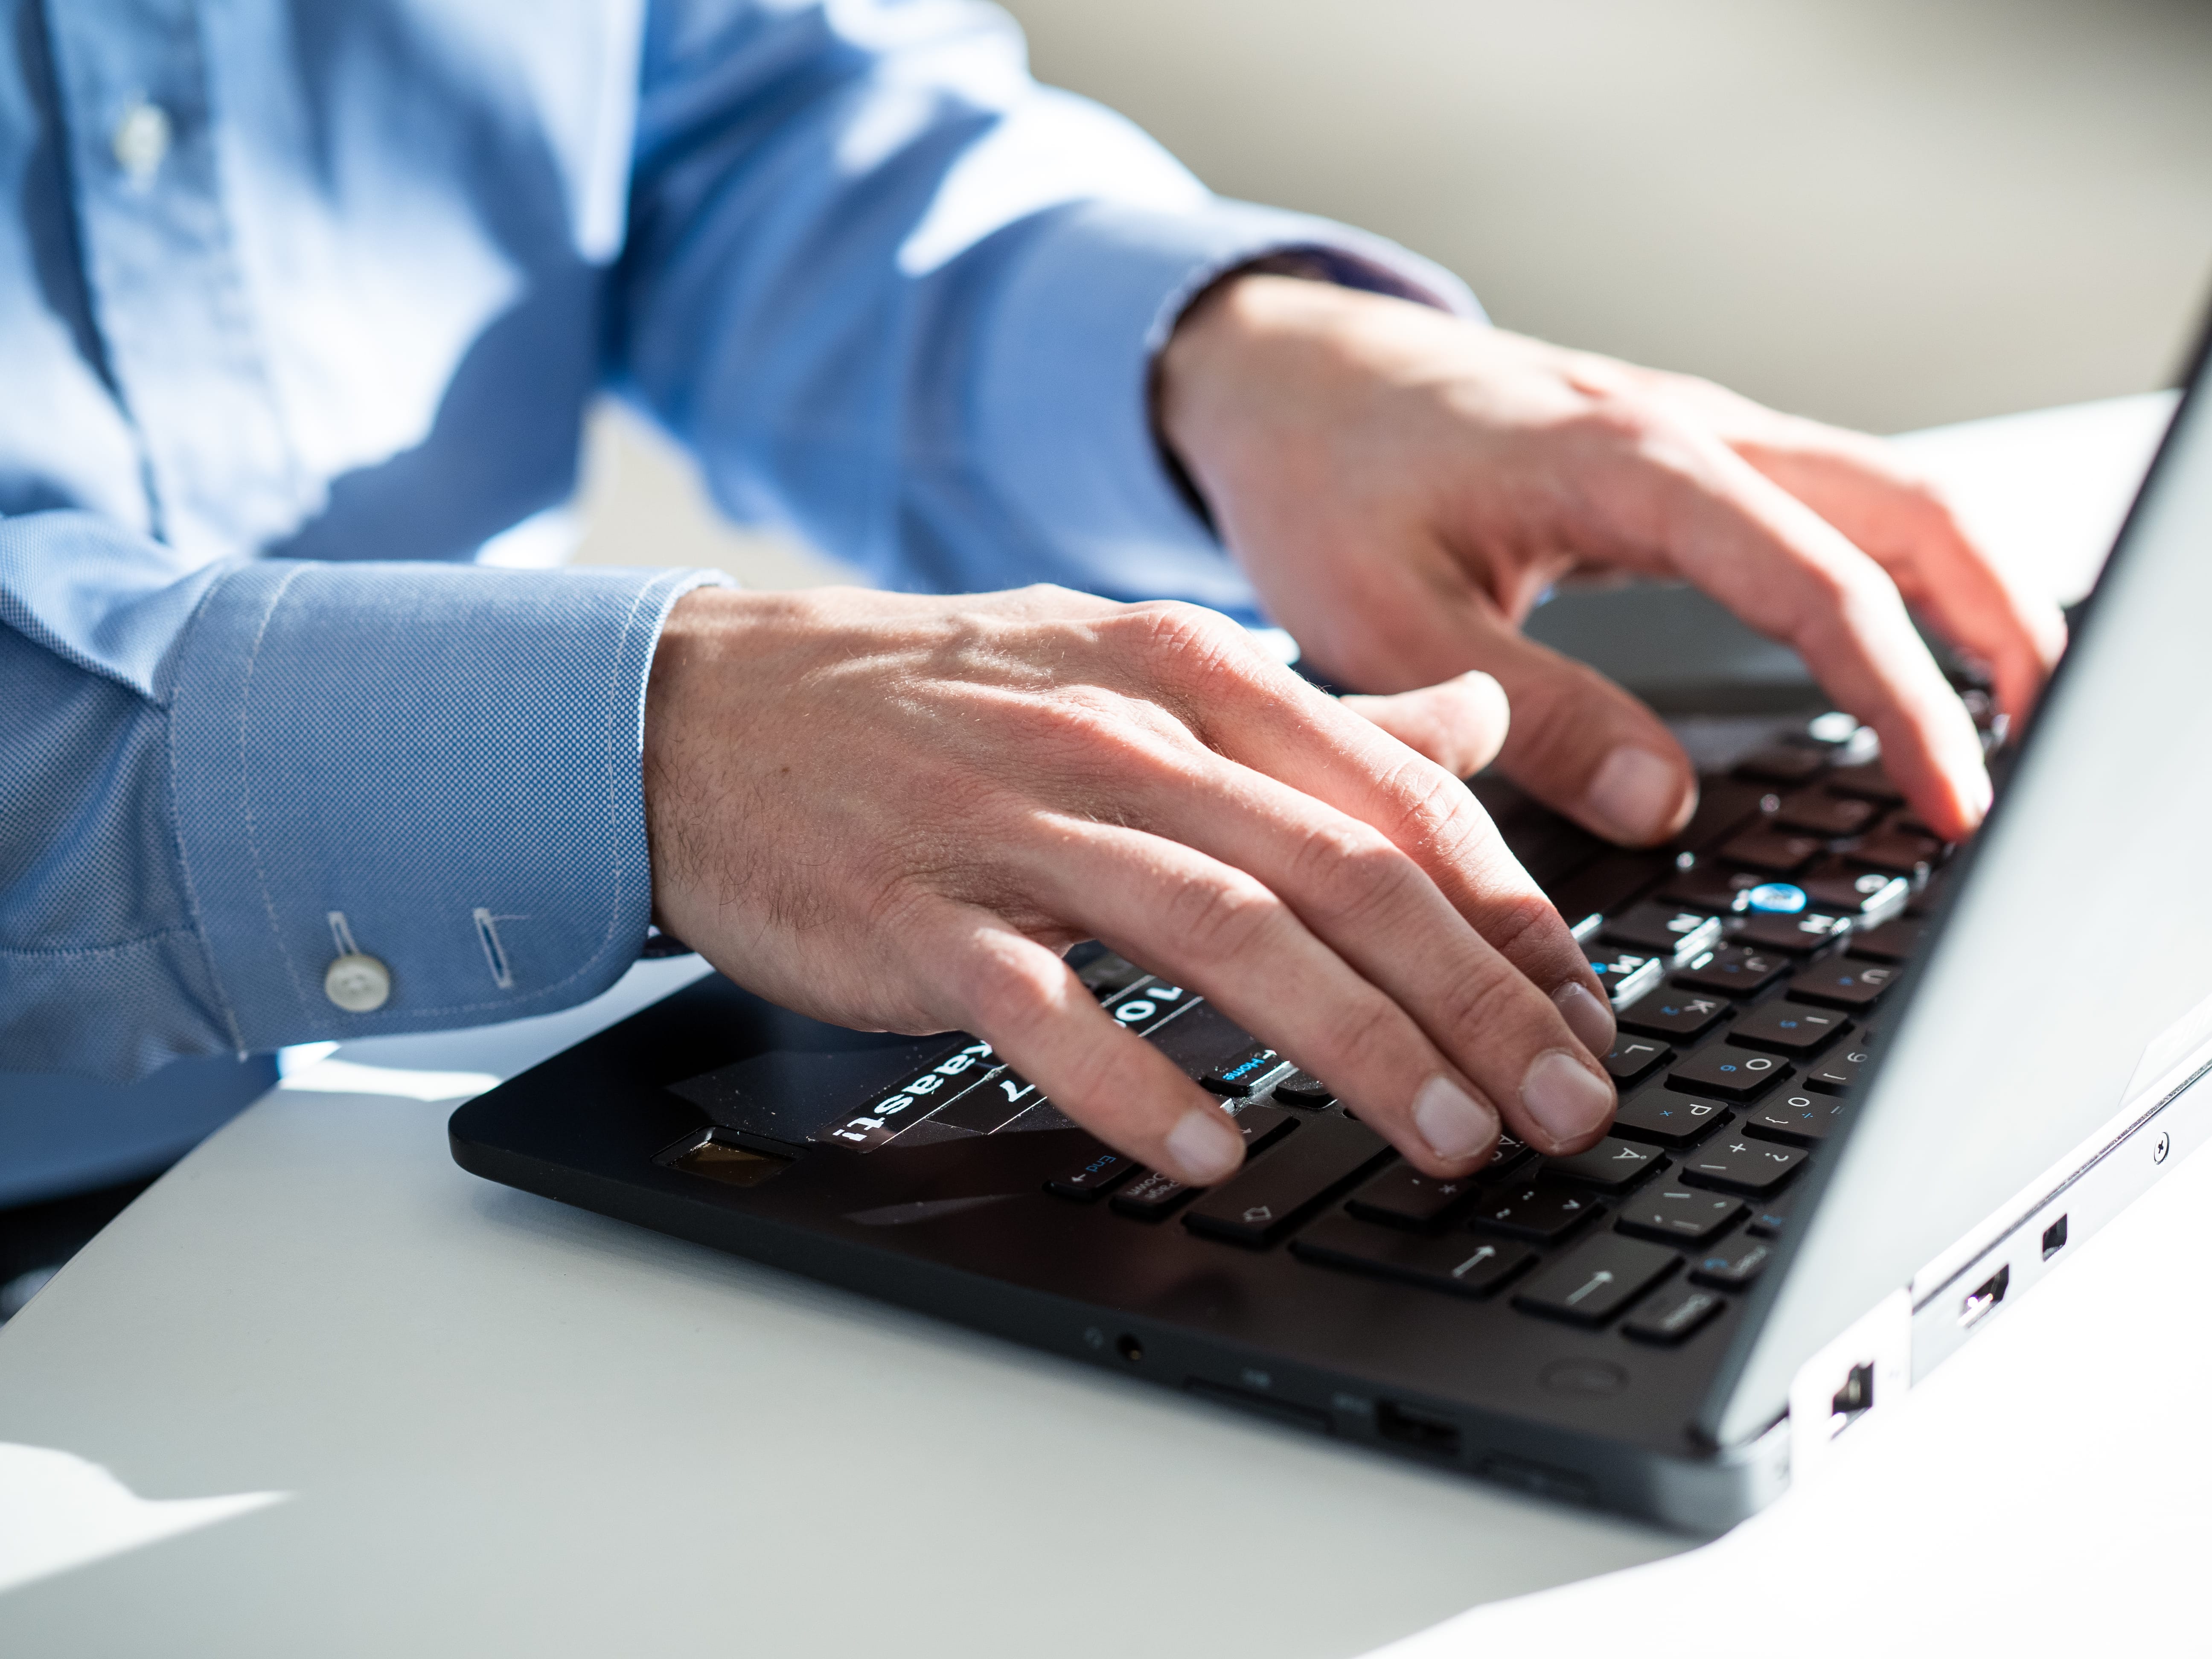 A man's hands on a laptop keyboard.